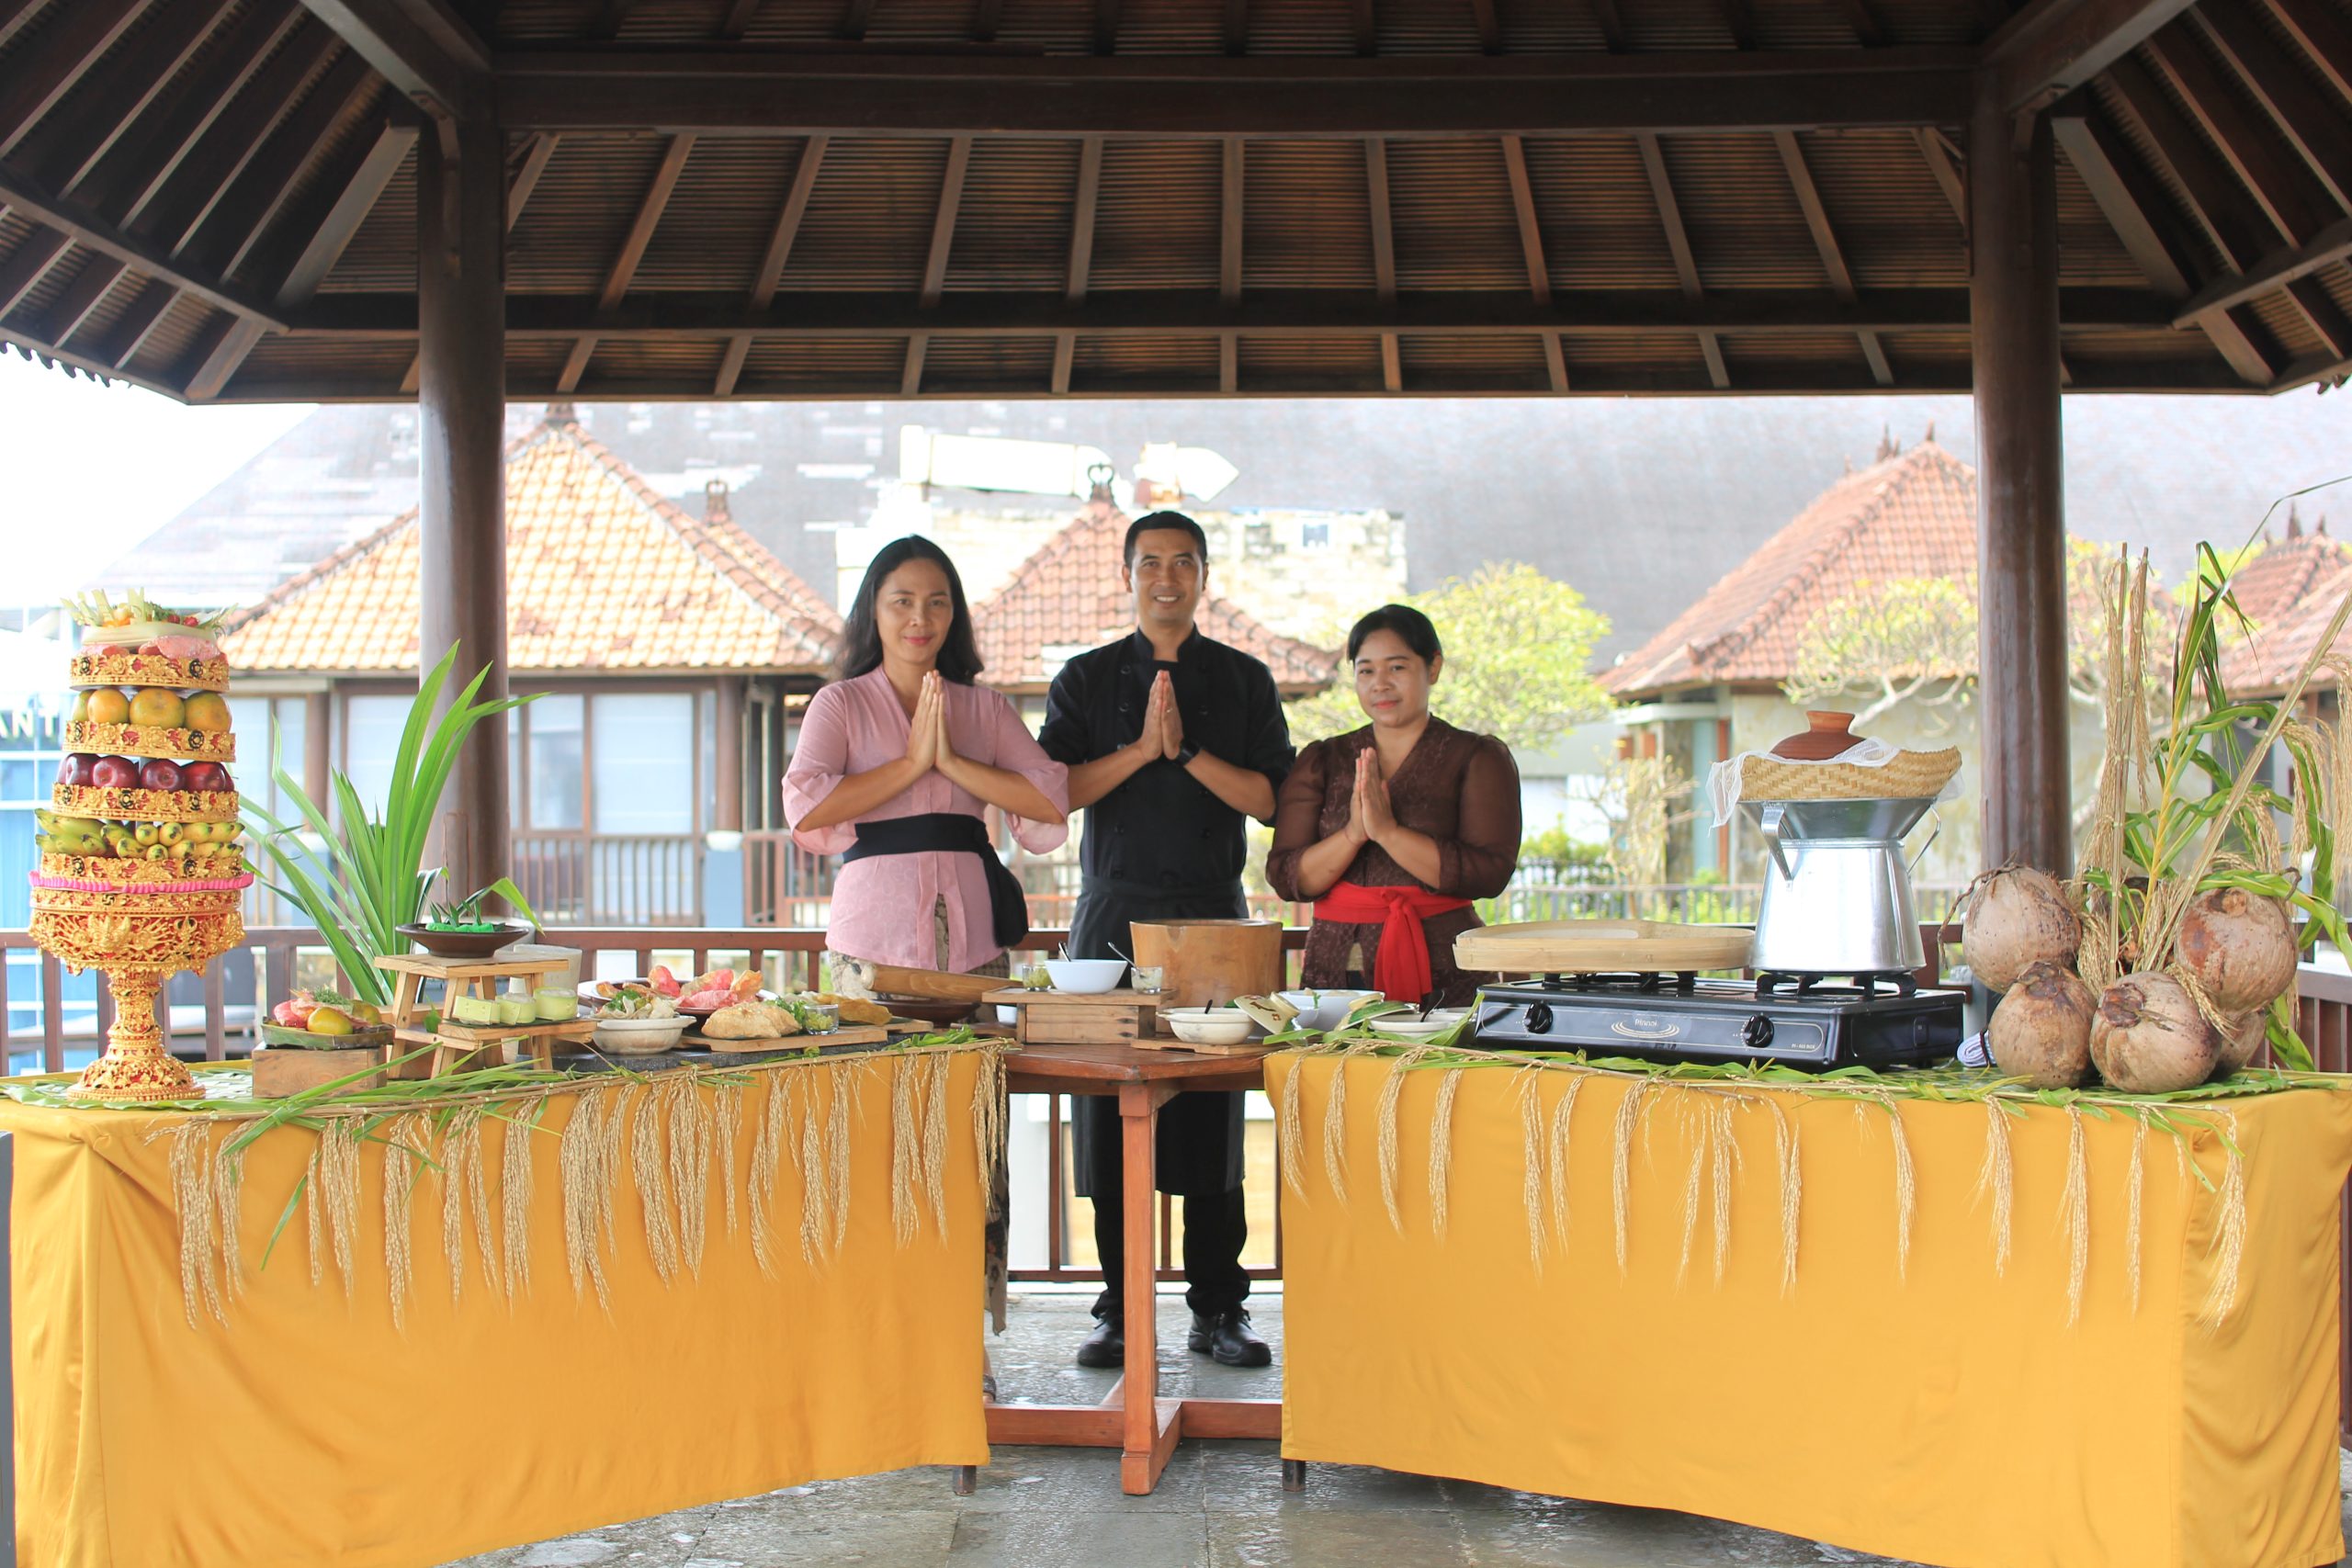 Discover how to make traditional balinese coconut-based snack in Kuta​